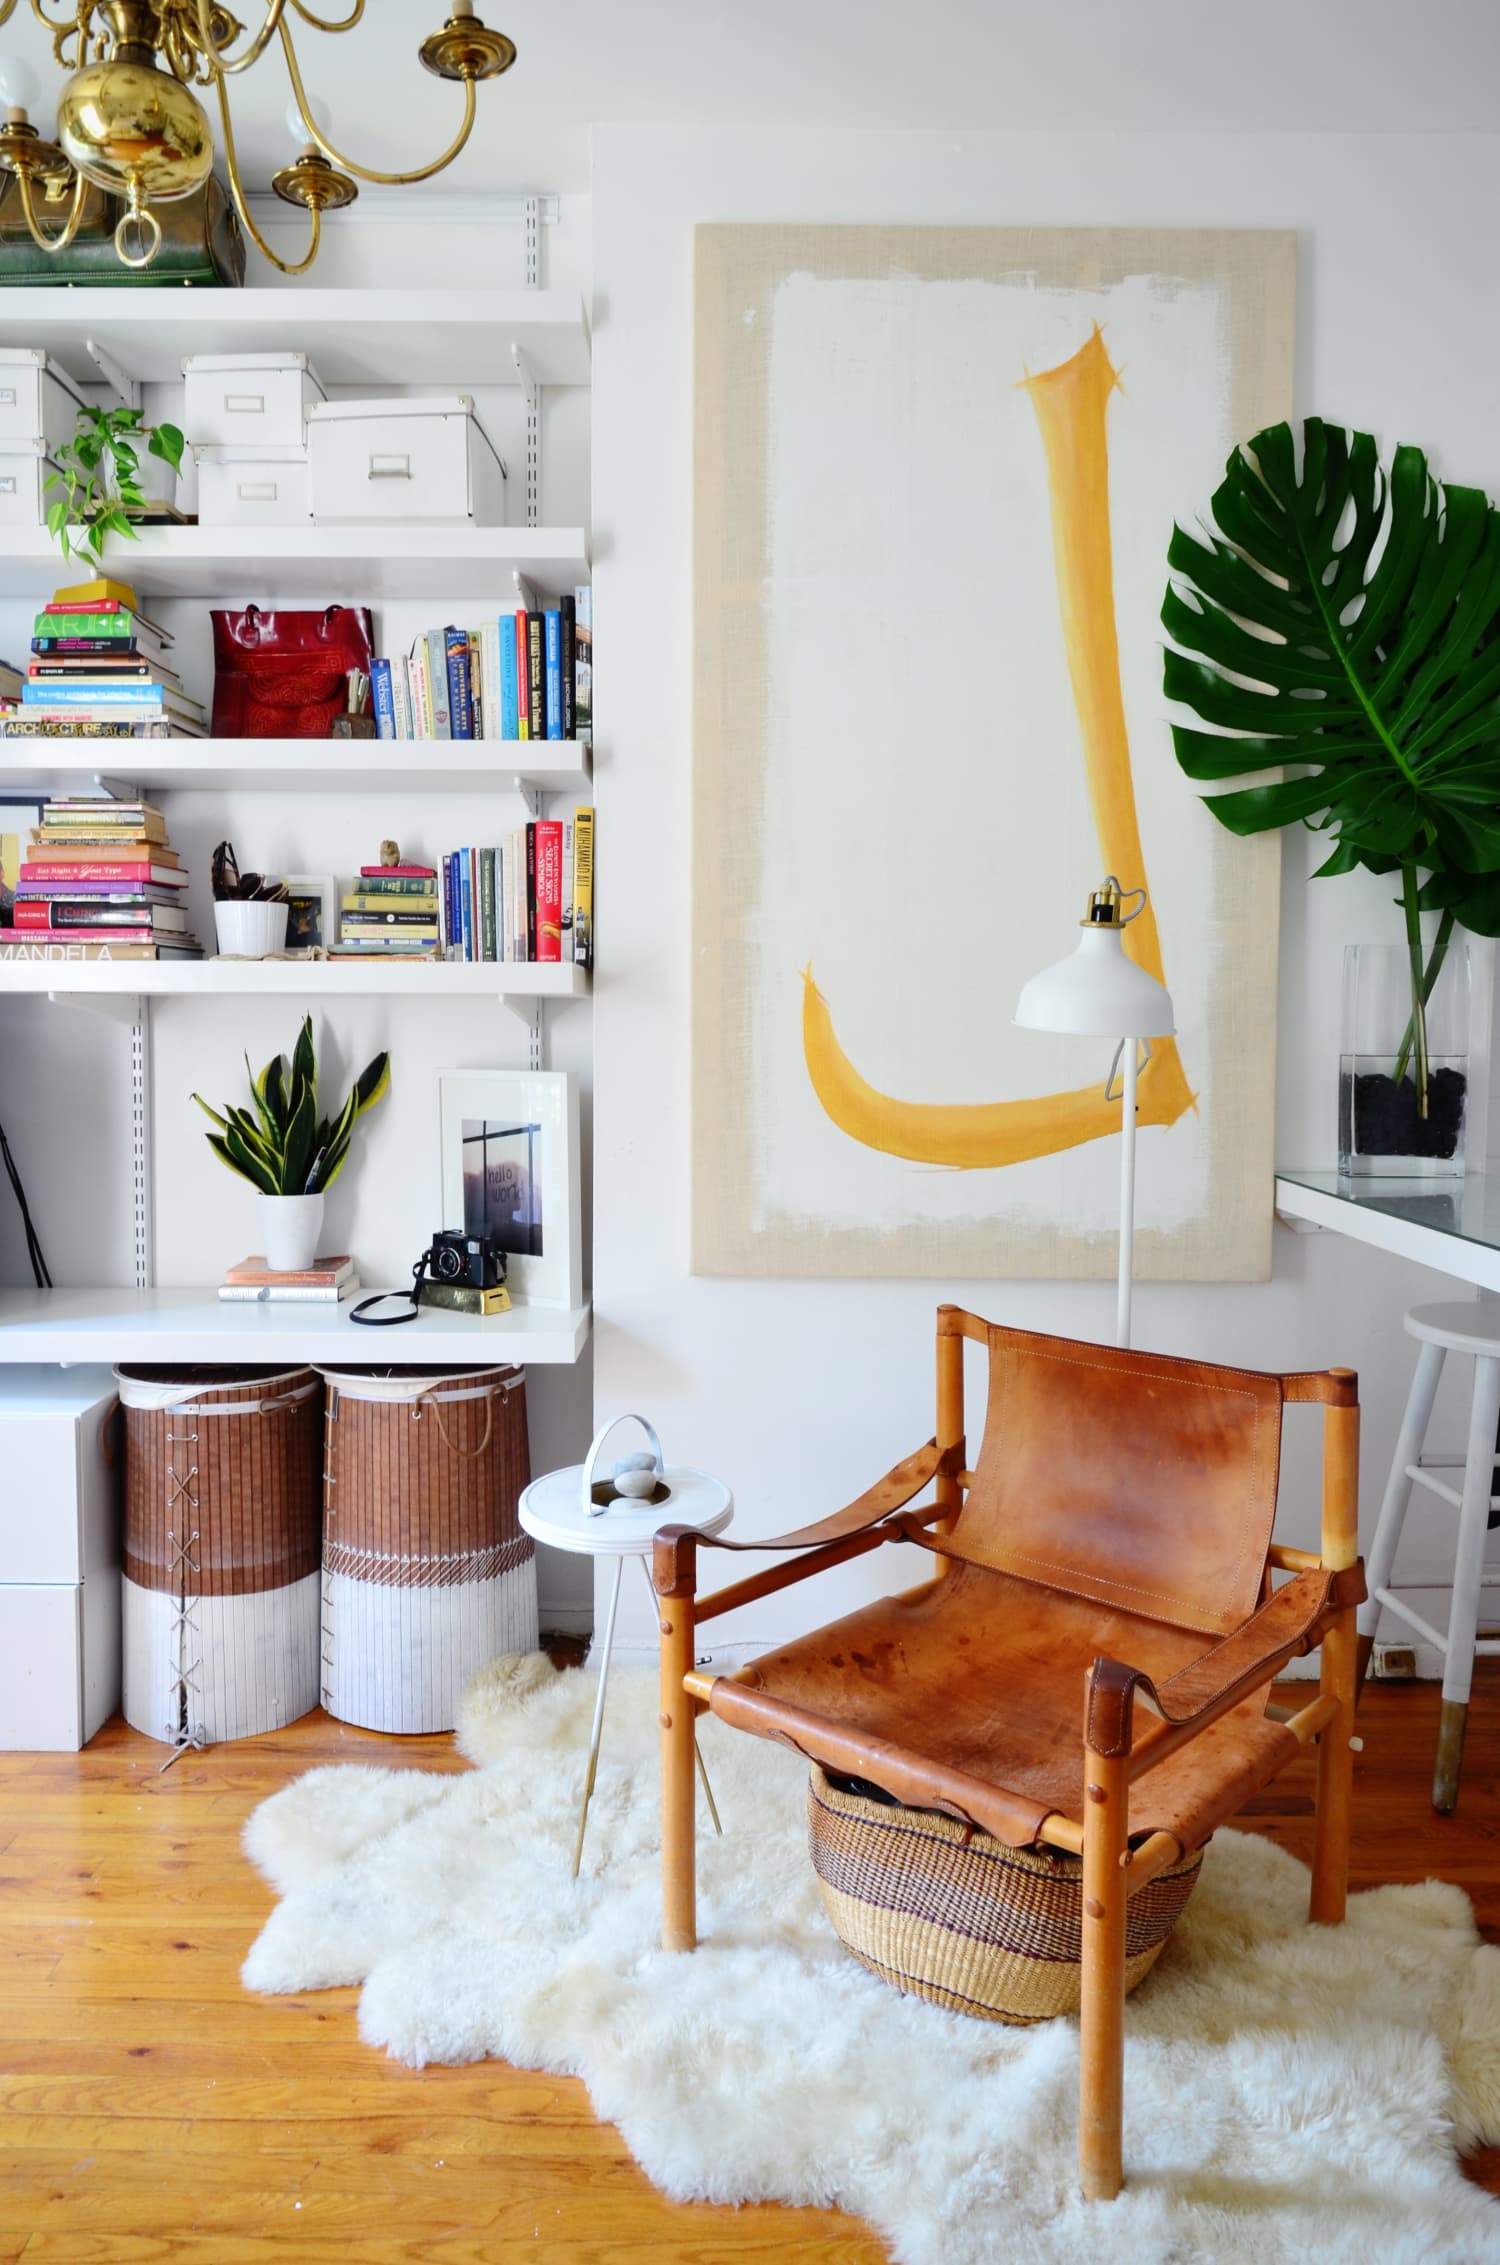 How To Arrange Your Furniture in a Studio Apartment ...
